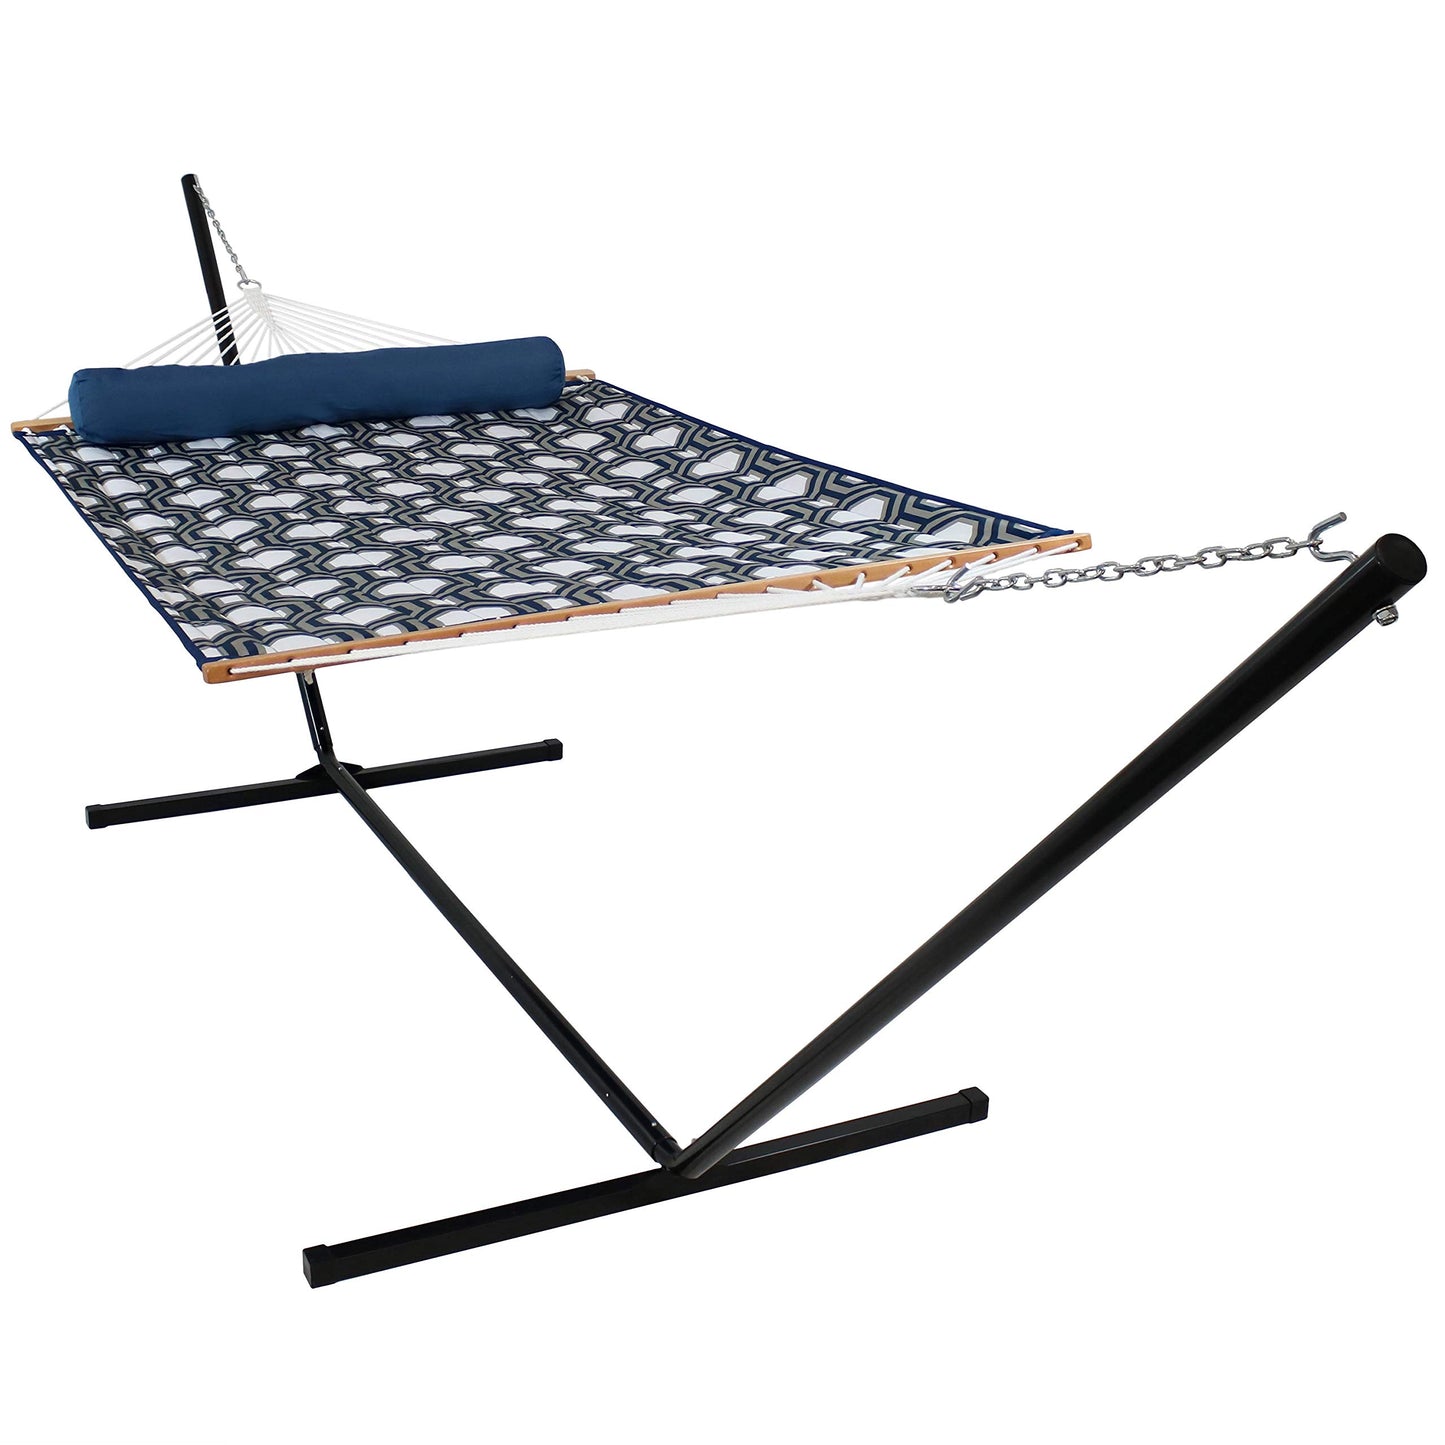 Double Quilted Fabric Hammock with Stand and Spreader Bars - Sunnydaze